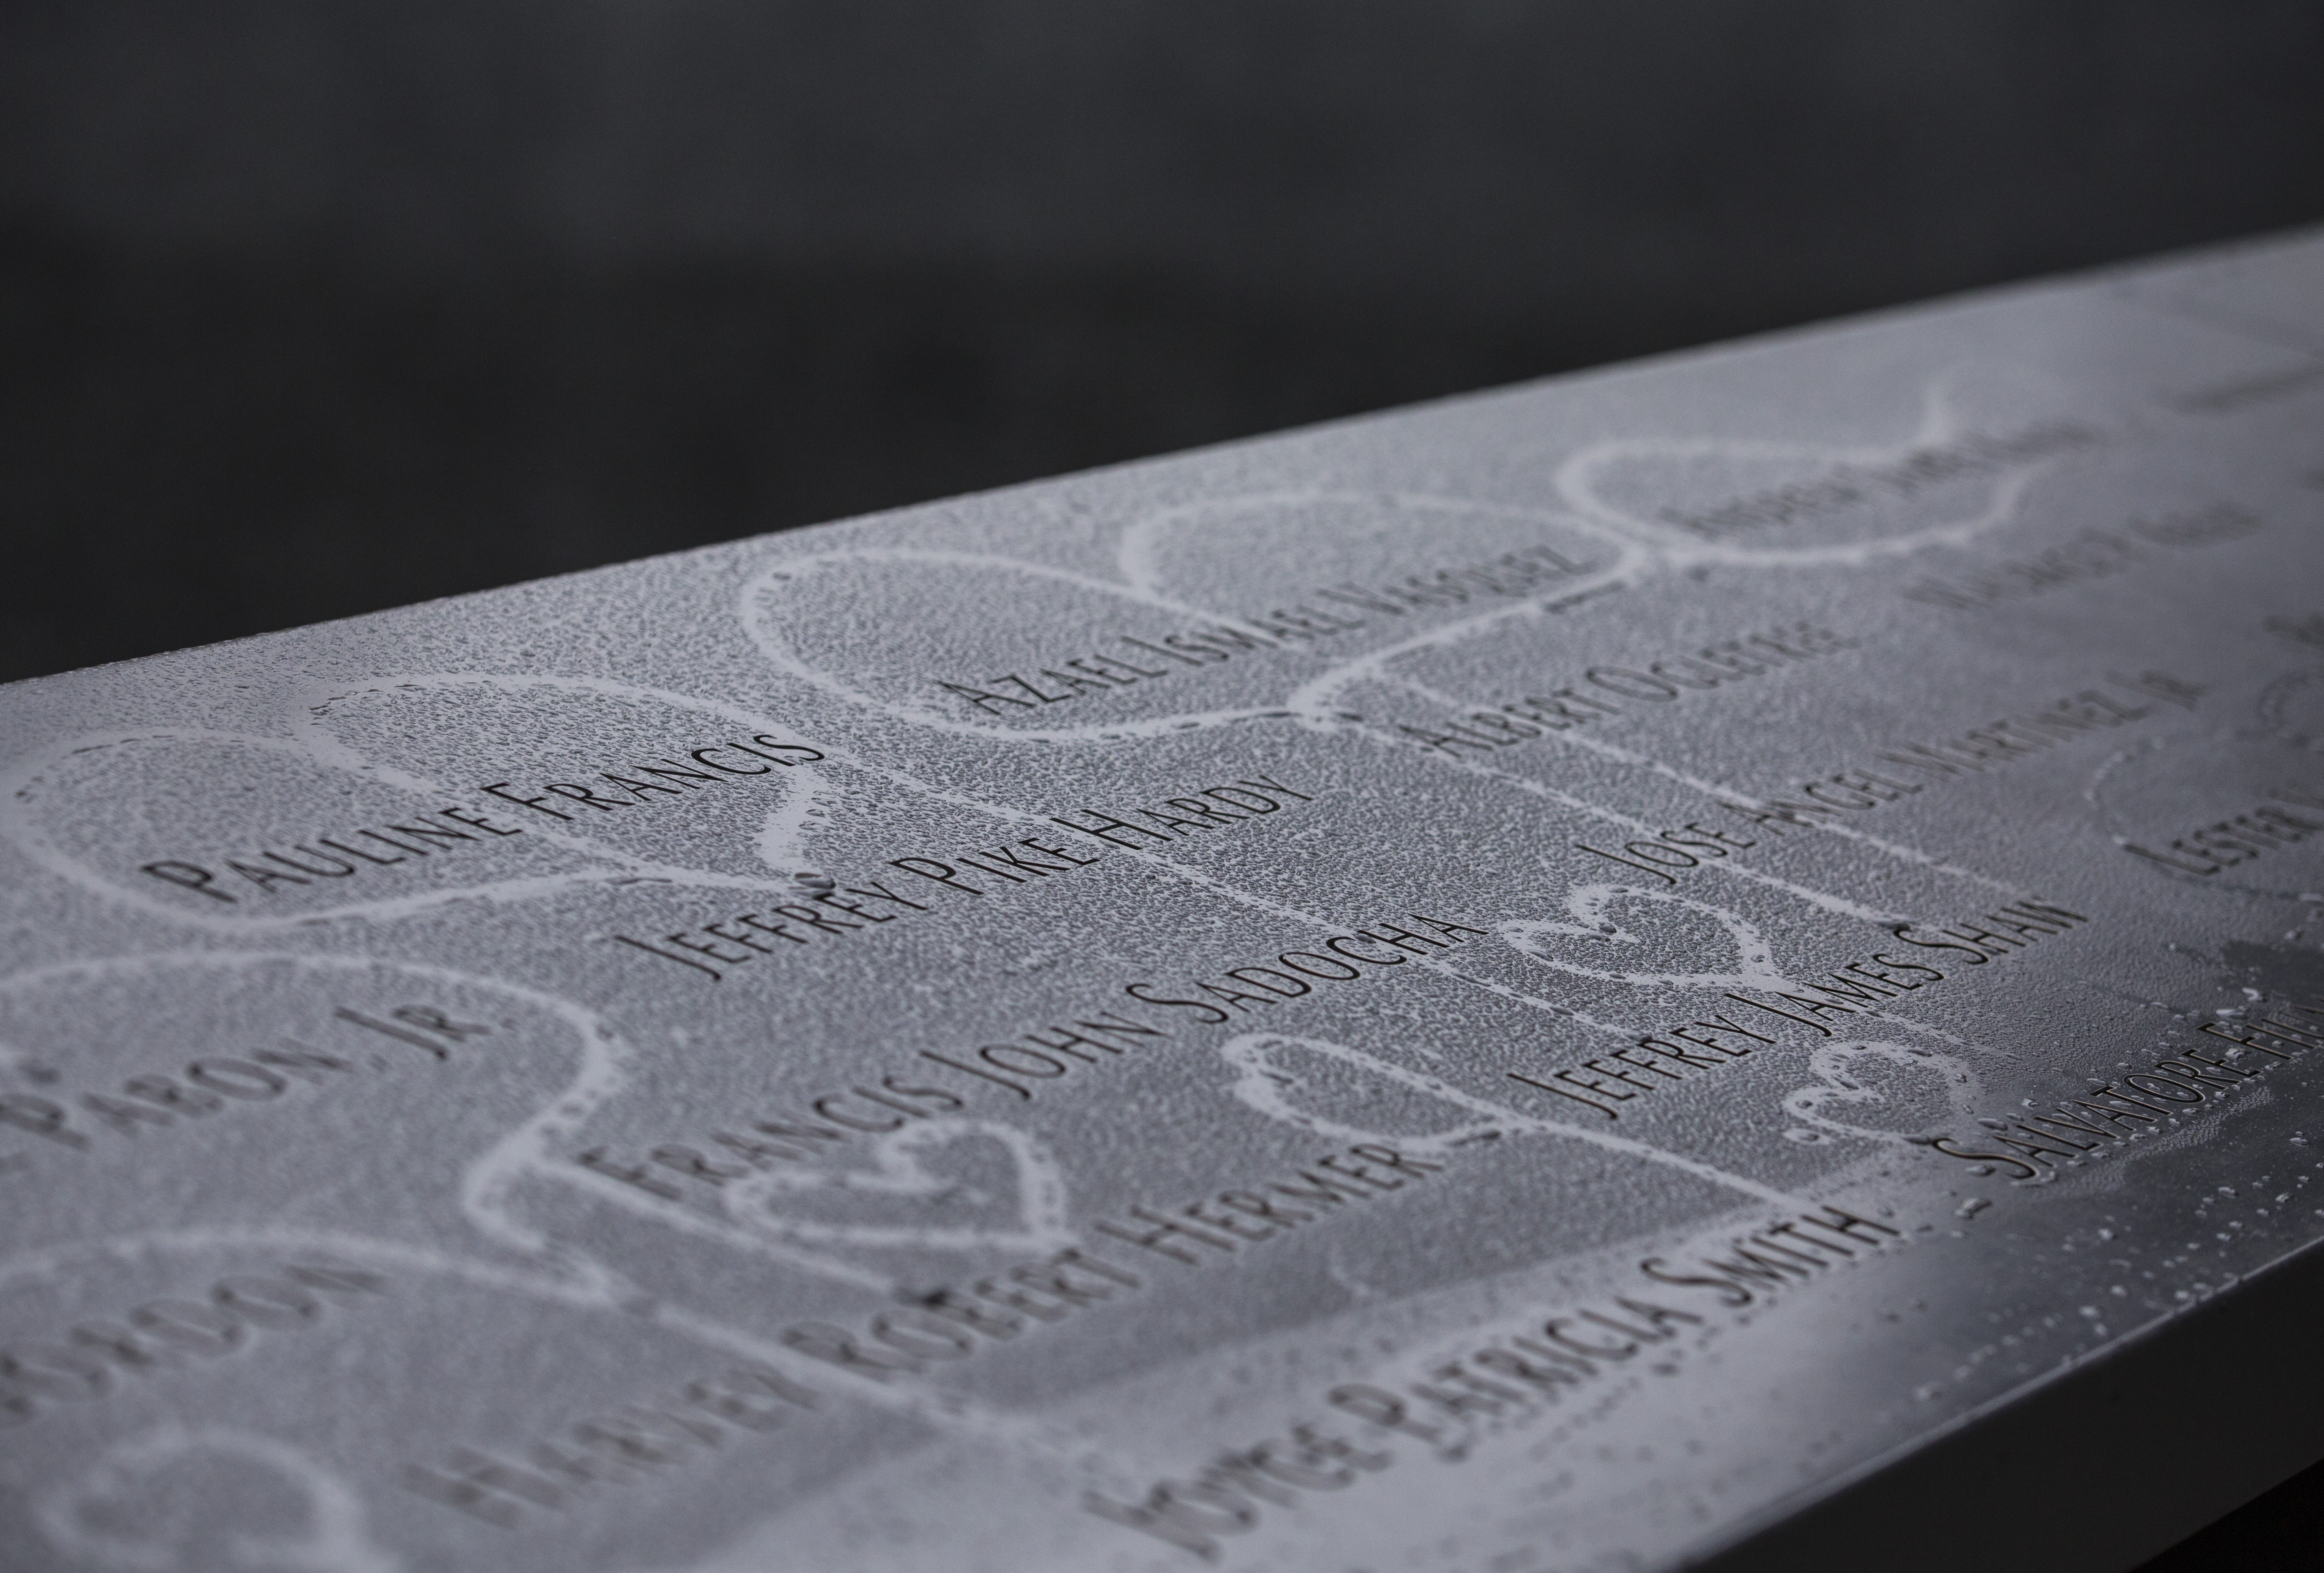 Hearts have been drawn in condensation that formed on names at the 9/11 Memorial.